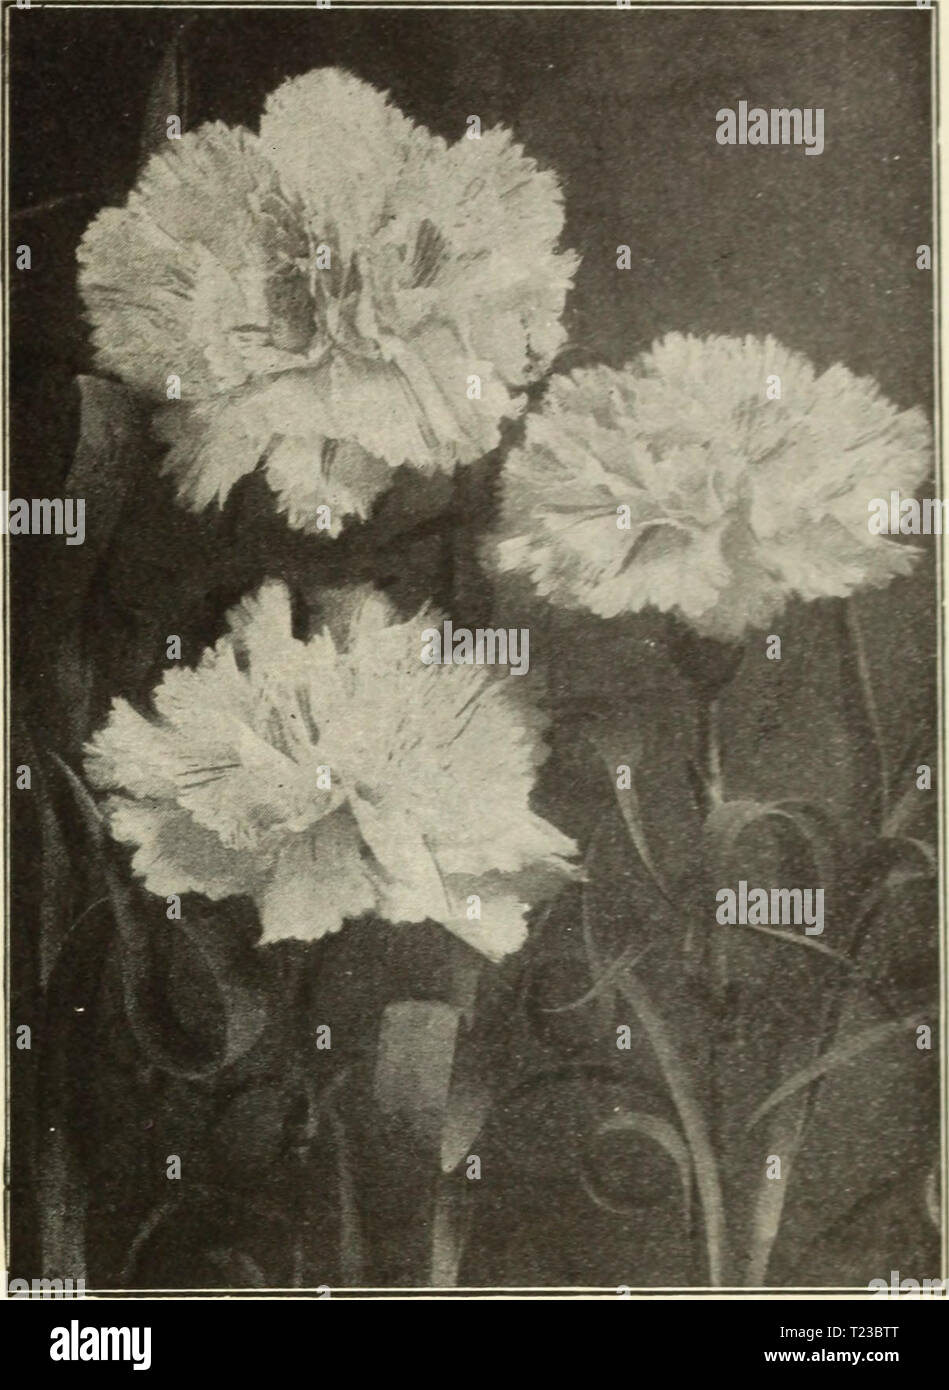 Archive image from page 88 of Dingee guide to rose culture Dingee guide to rose culture  dingeeguidetoros19ding 7 Year: 1916  Dingee Magnificent Carnations We offer stronc plants and, whether planted in the open ground or in pots, they quickly make large specimens, blooming profusely during the summer. For winter bloom pinch the plants back from time to time dur- ing the summer. Bring indoors in early fall. Grown in pots they will bloom abundantly dux'ing the winter. New Varieties Alma Ward—New white variegated; large and fragrant. Dorothy Gordon—A fine, clear, deep shell pink. Gloriosa—Pure d Stock Photo